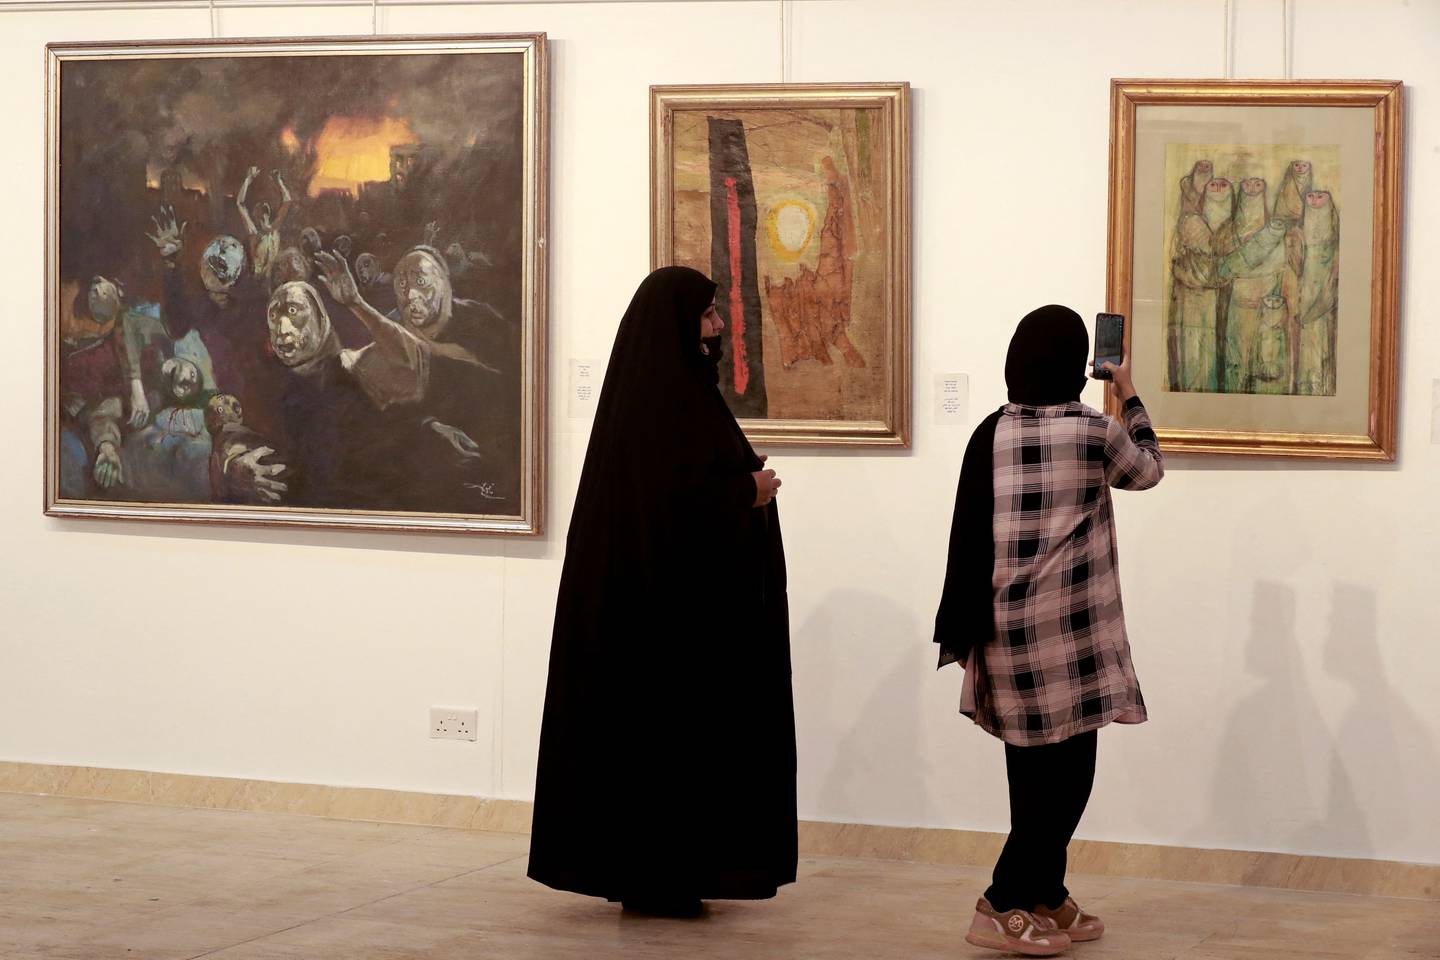 Visitors look at paintings by renowned artist Faiq Hassan, on display at Iraq's Ministry of Culture, in Baghdad on April 6, 2022. AFP